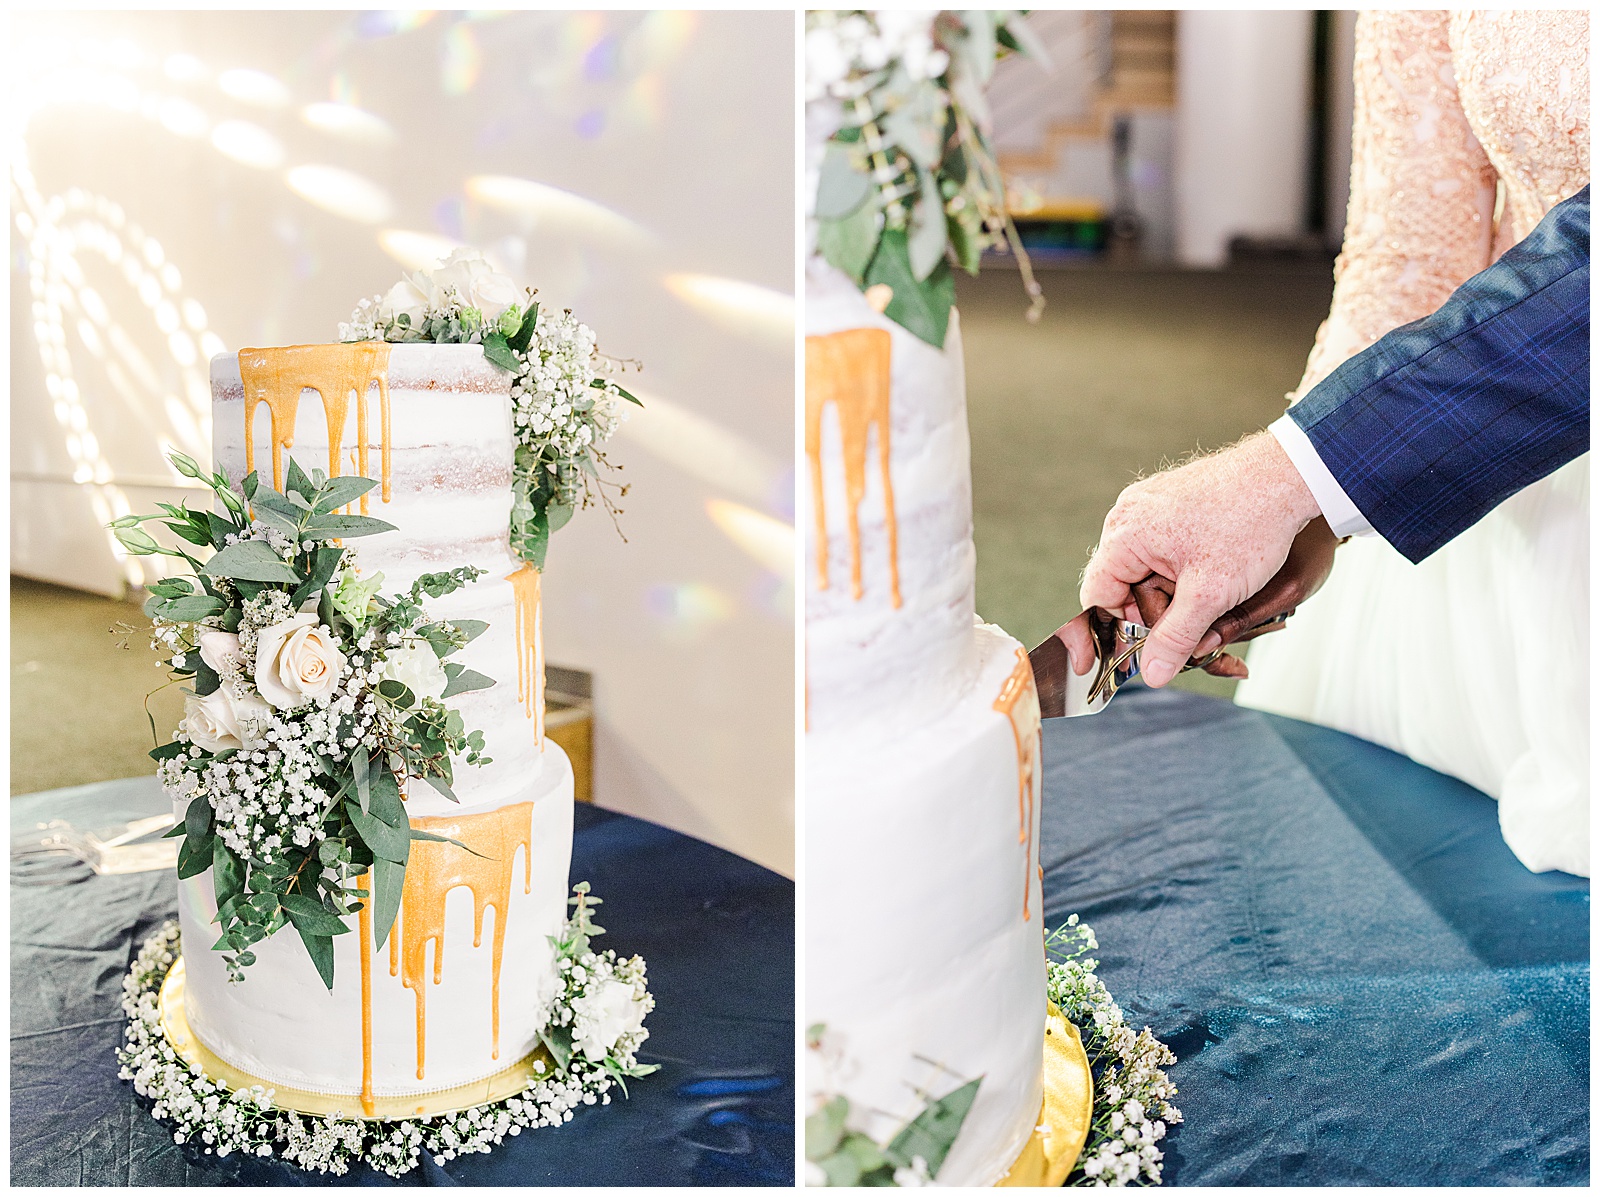 Bride and groom cutting cake